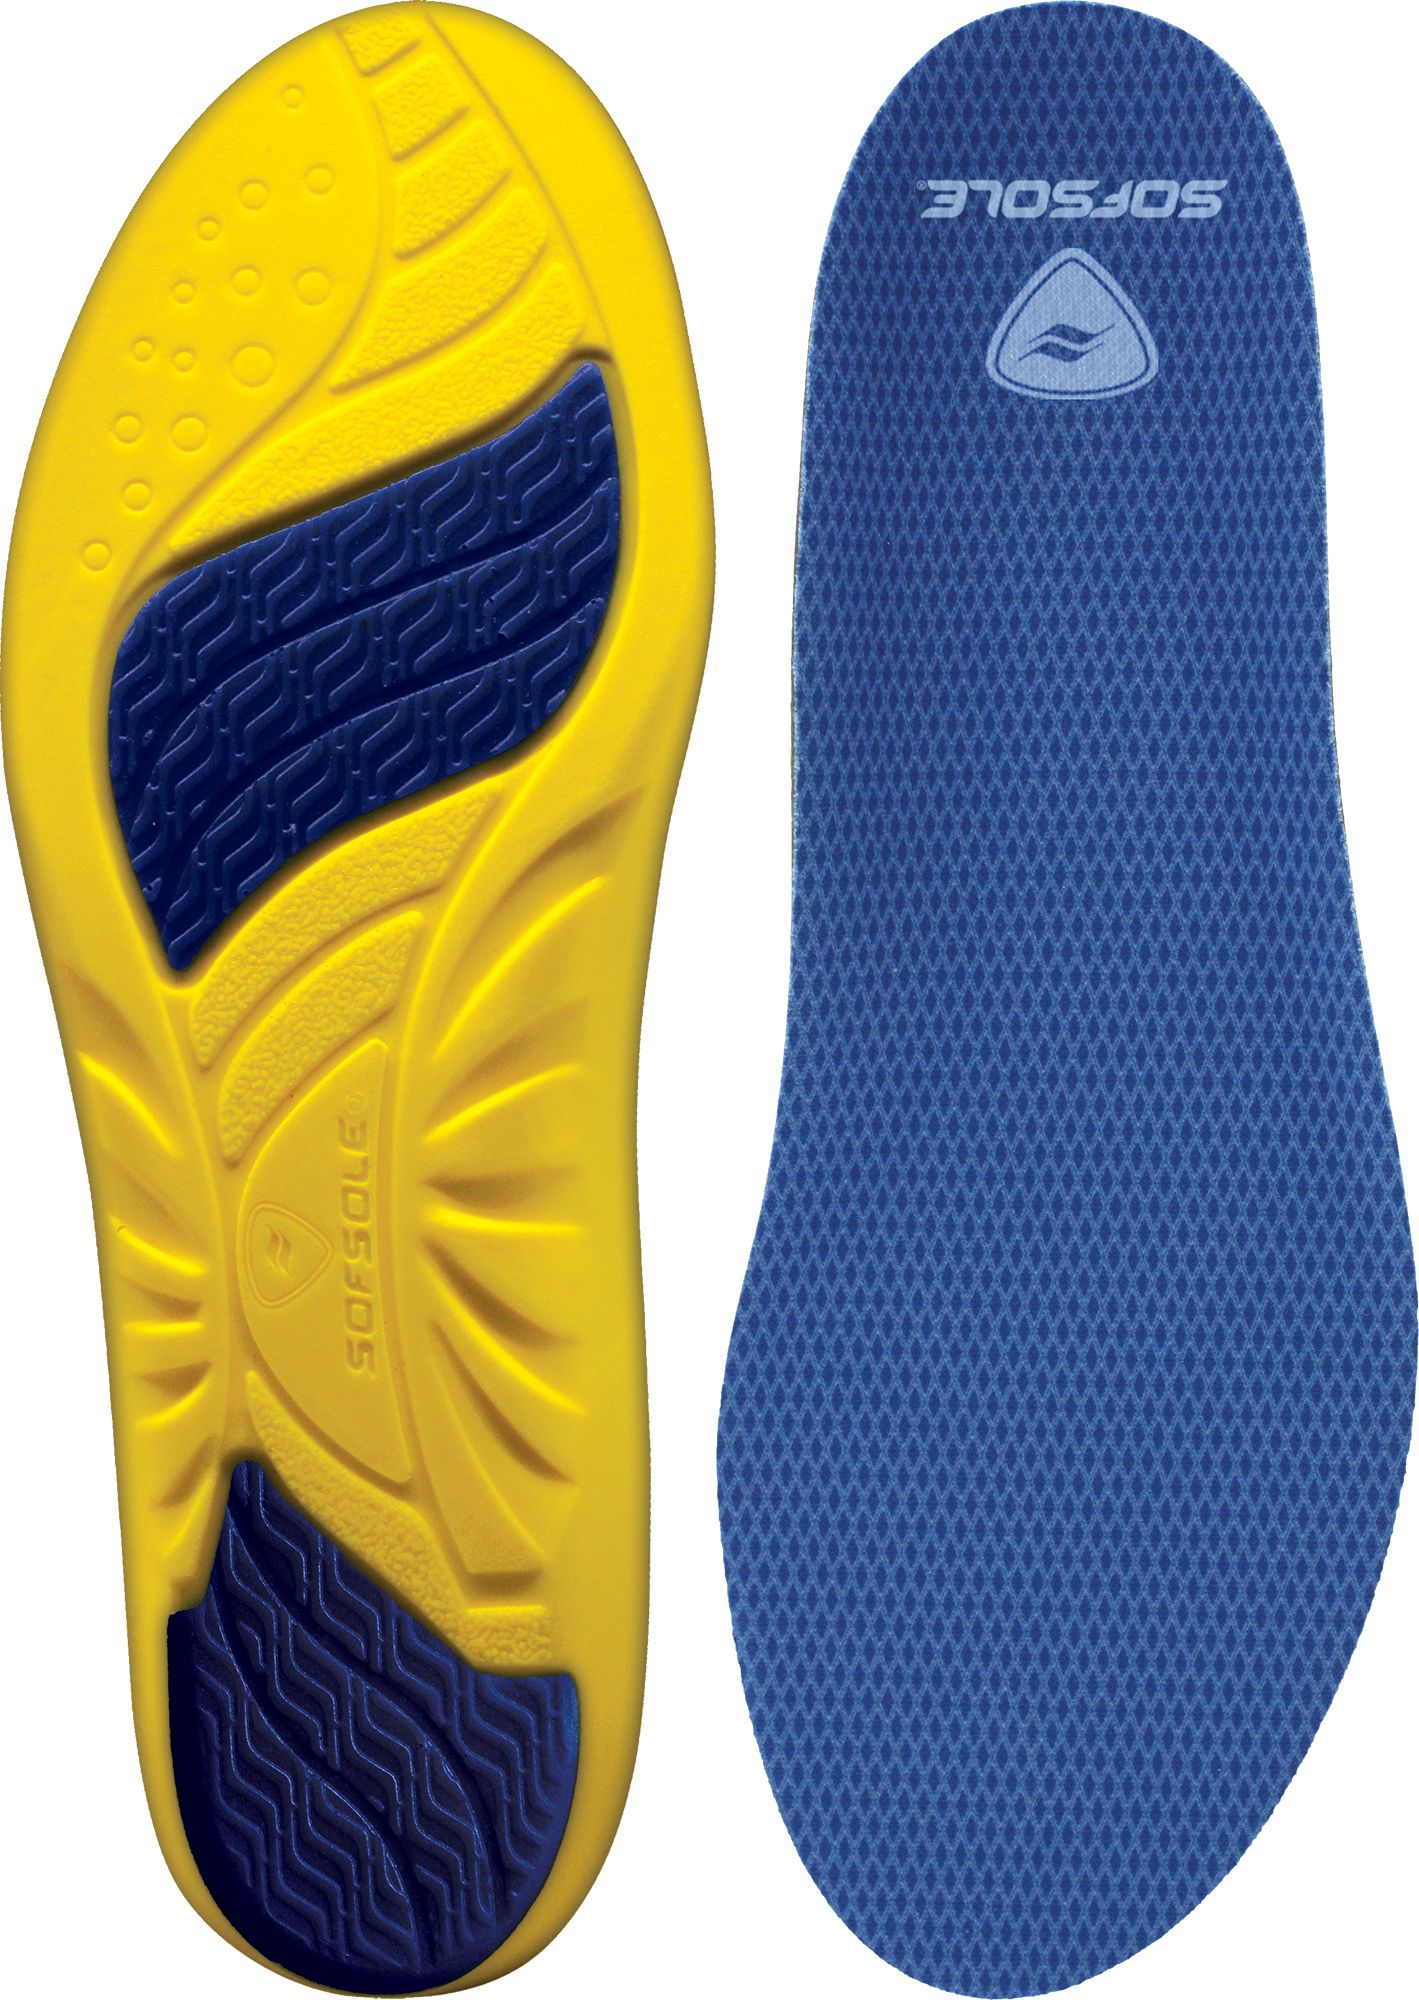 nike insoles for sale